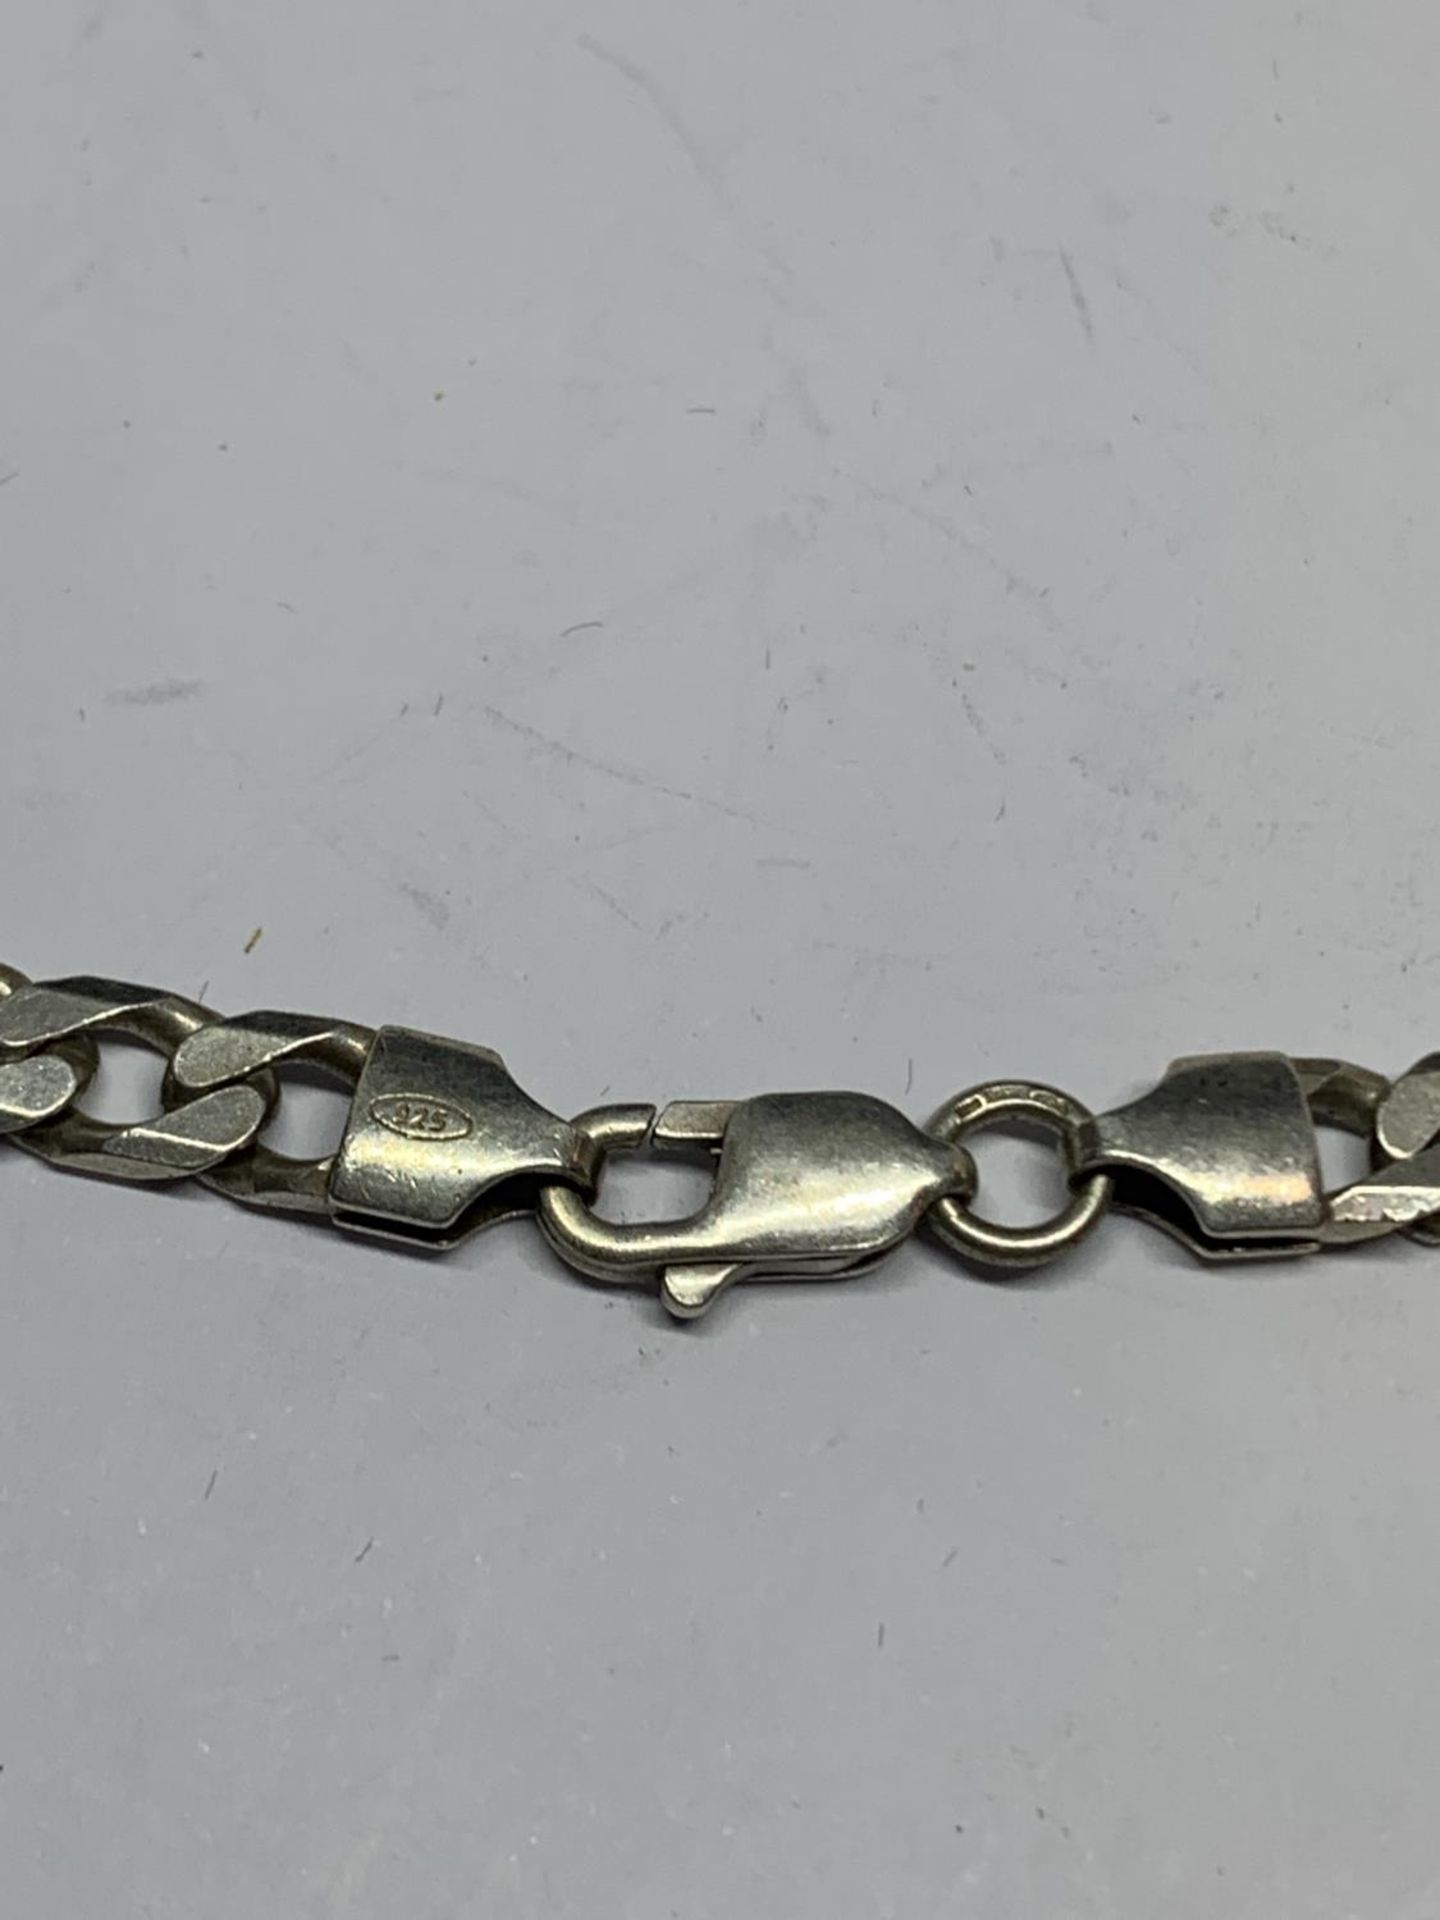 A 20" SILVER FLAT LINK NECK CHAIN - Image 3 of 3